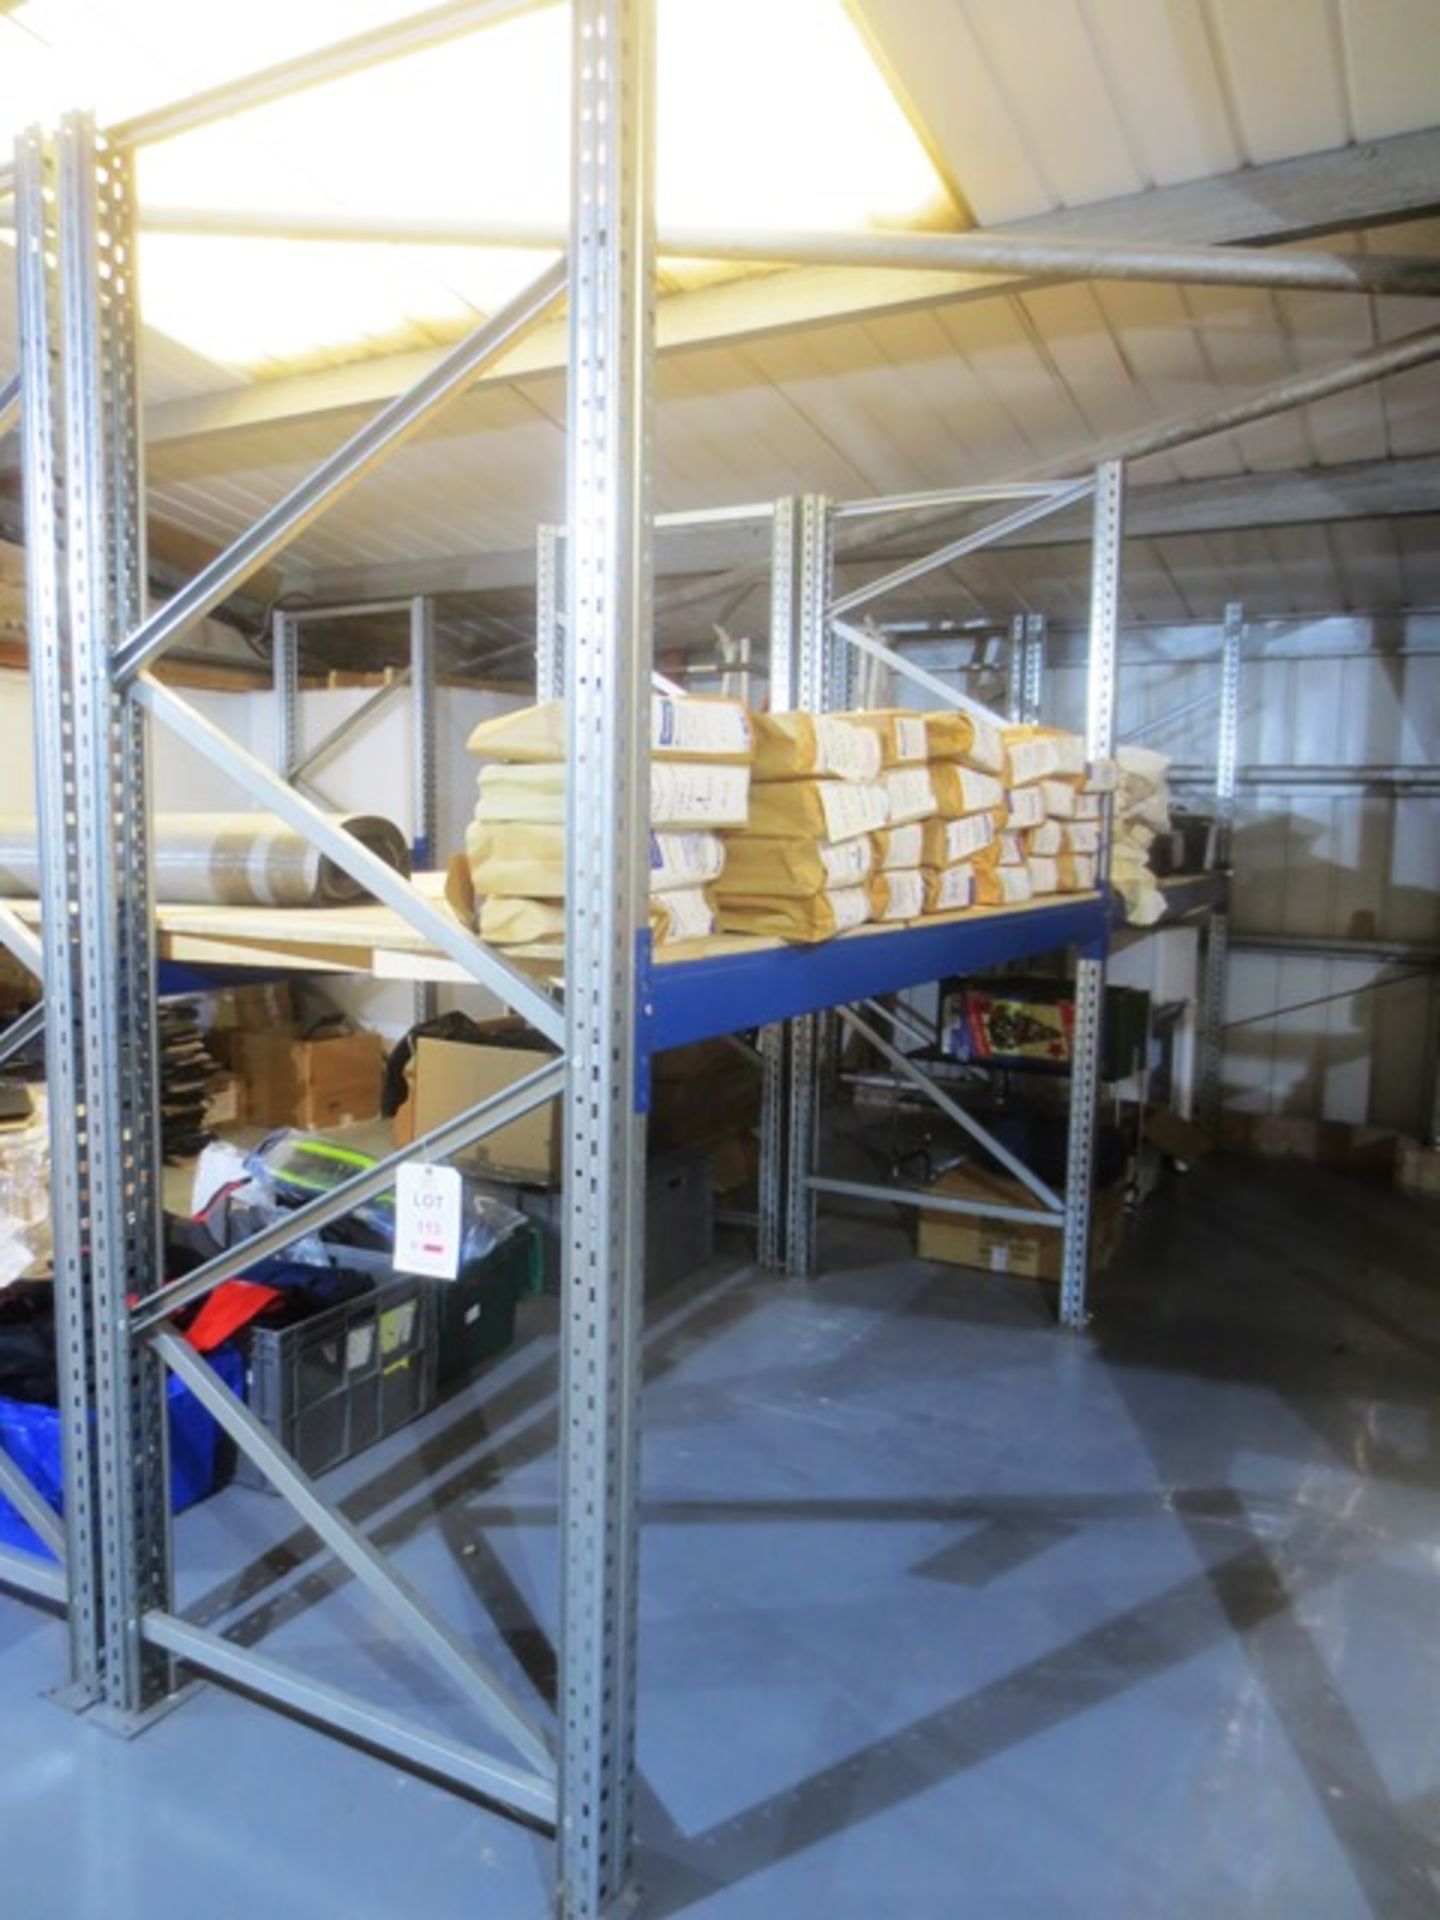 Two bays of adjustable boltless racking (as lotted), approx 2700 x 2600 x 1050mm per bay